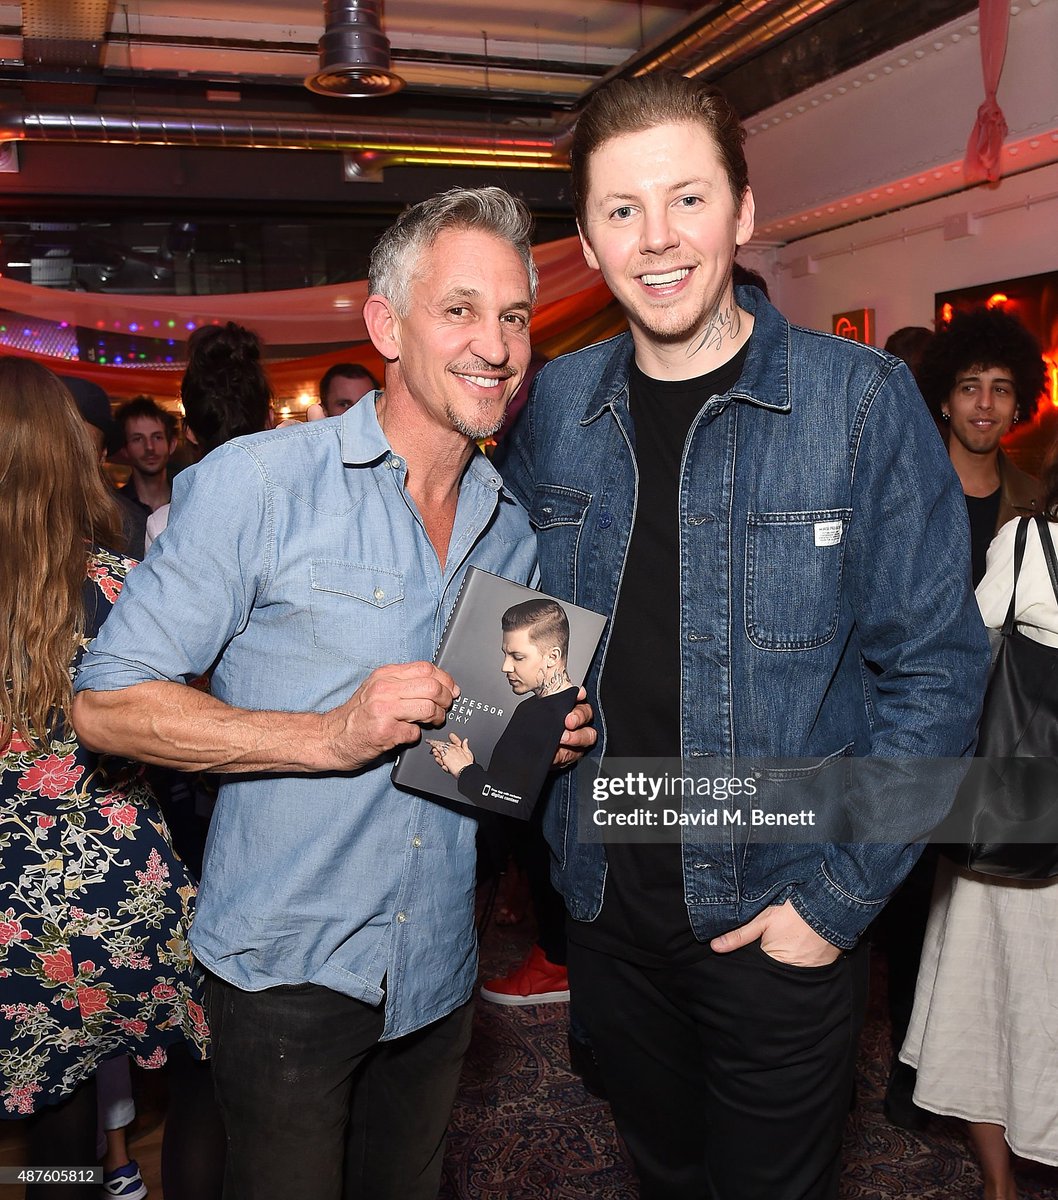 Gary Lineker and Professor Green attend the launch party for Professor Green's autobiography 'Lucky' sponsored by Crystal Head Vodka at Lights Of Soho (2015)